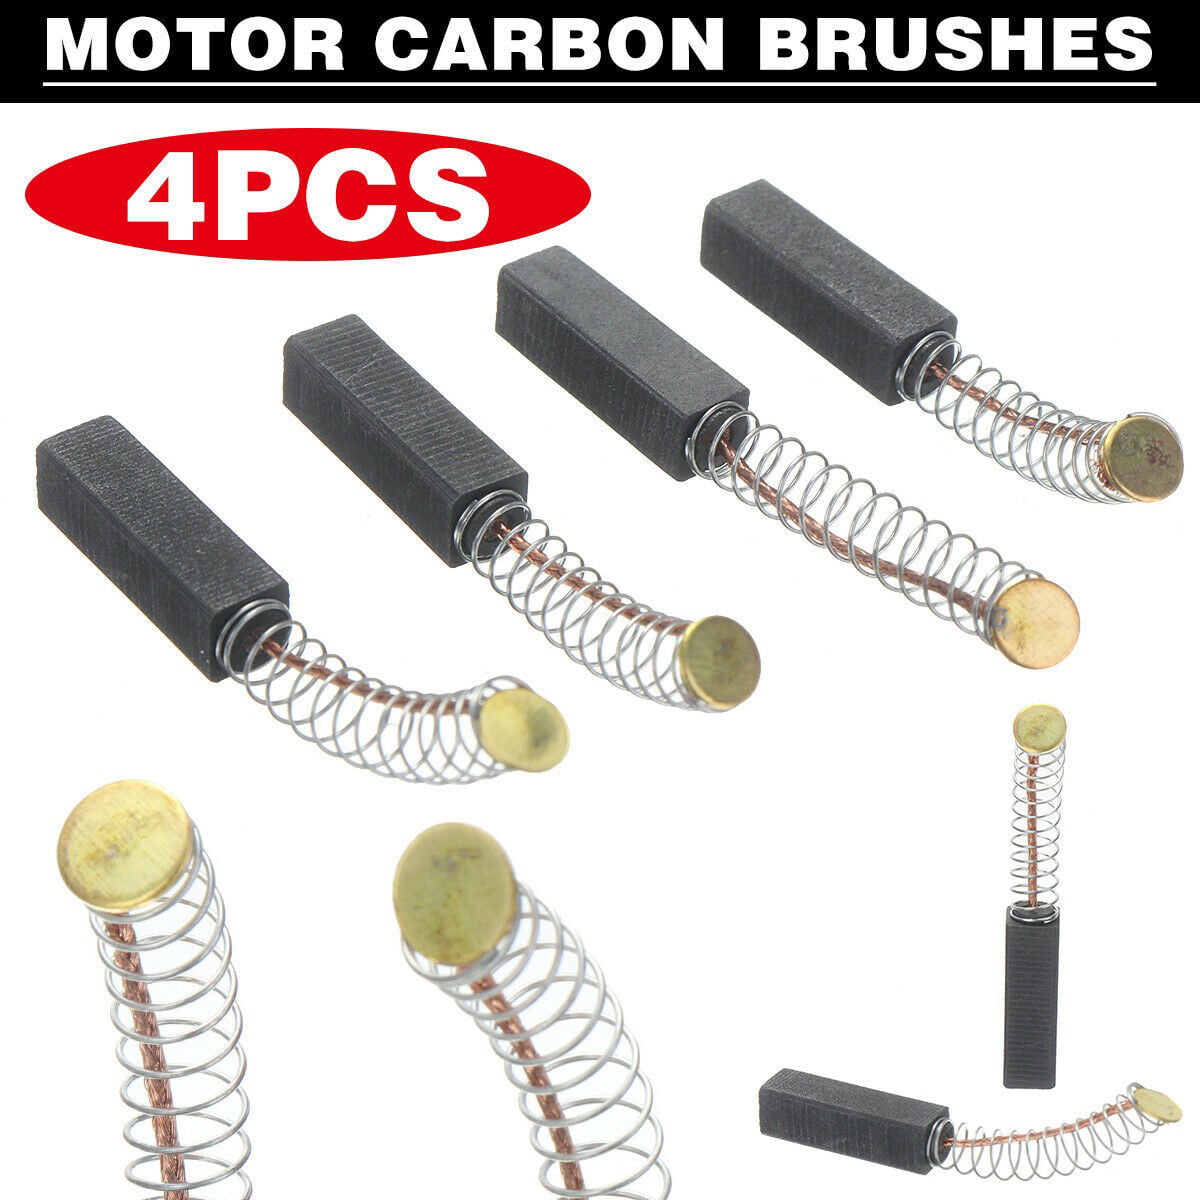 4pcs 6 x 6 x 20mm Carbon Brush Replacement fit for Generic Electric Motor 